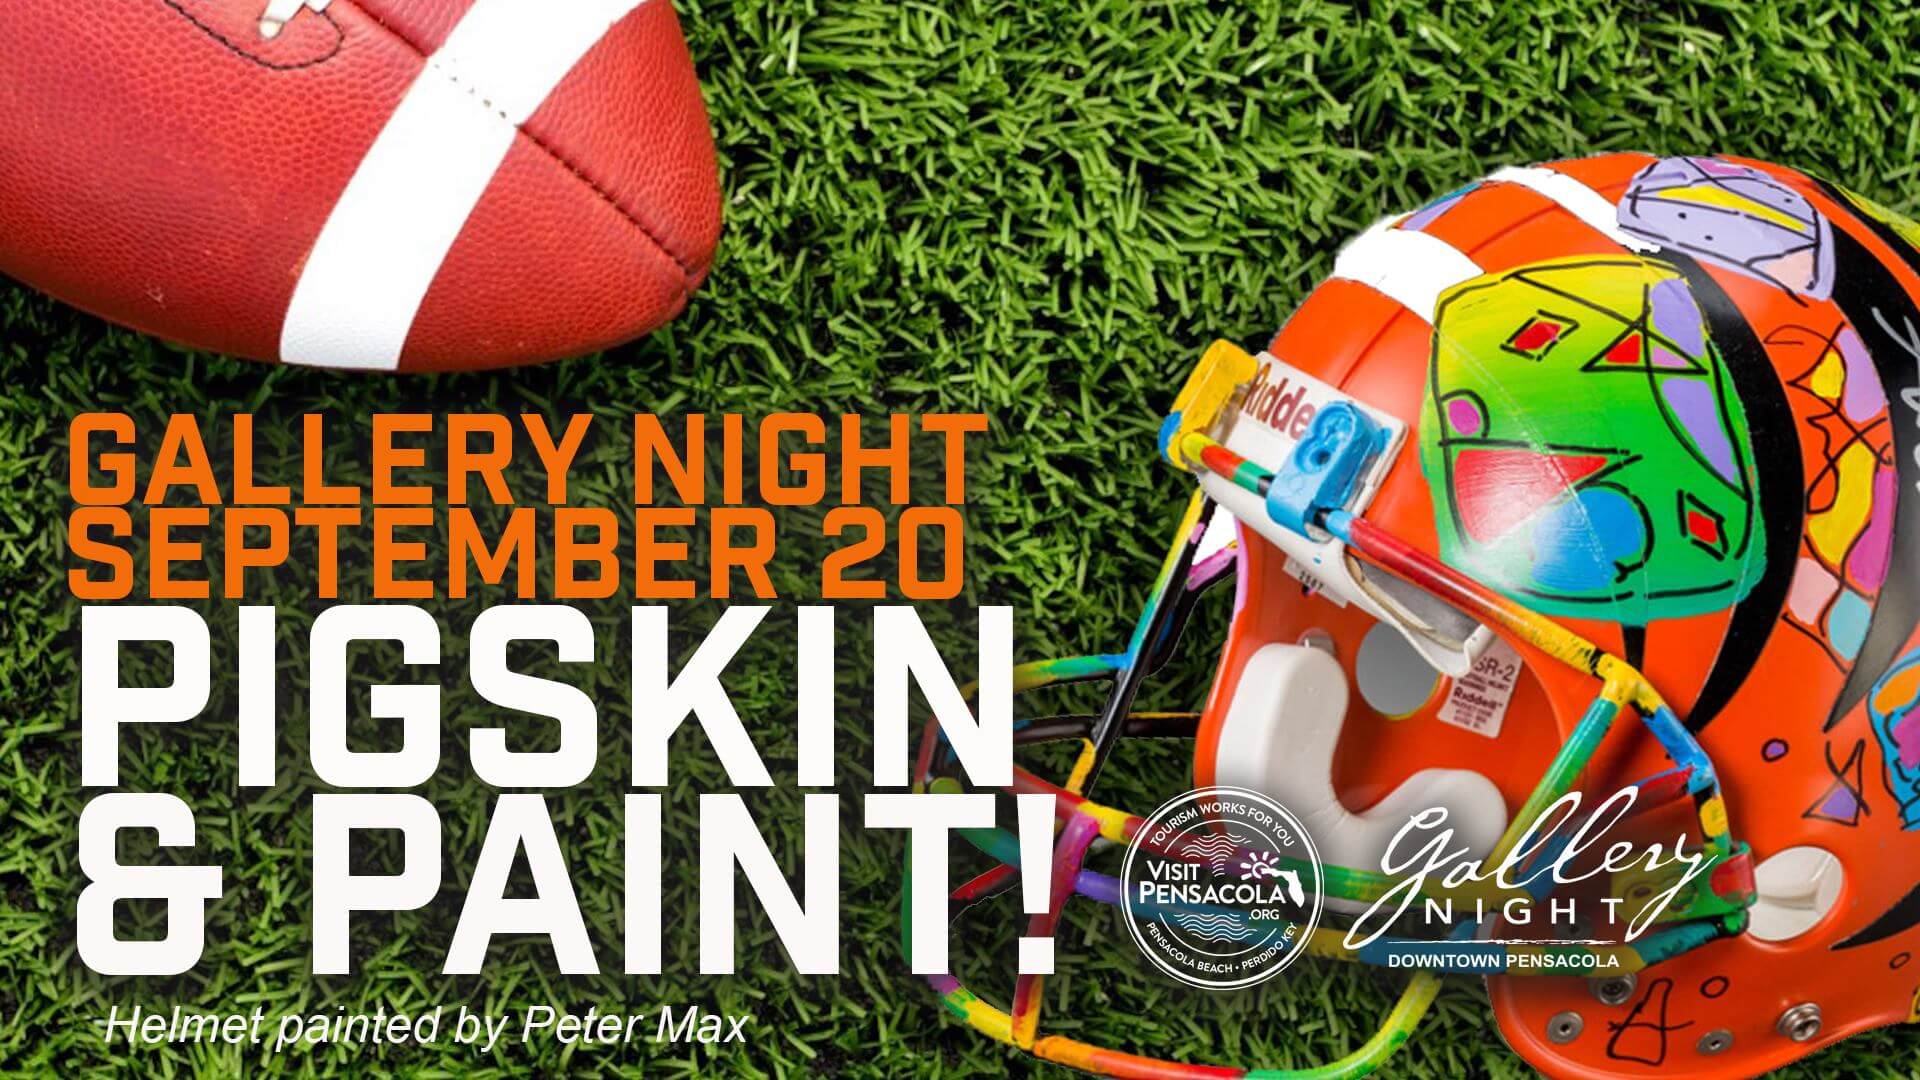 Pigskin and Paint Gallery Night Pensacola September 2019